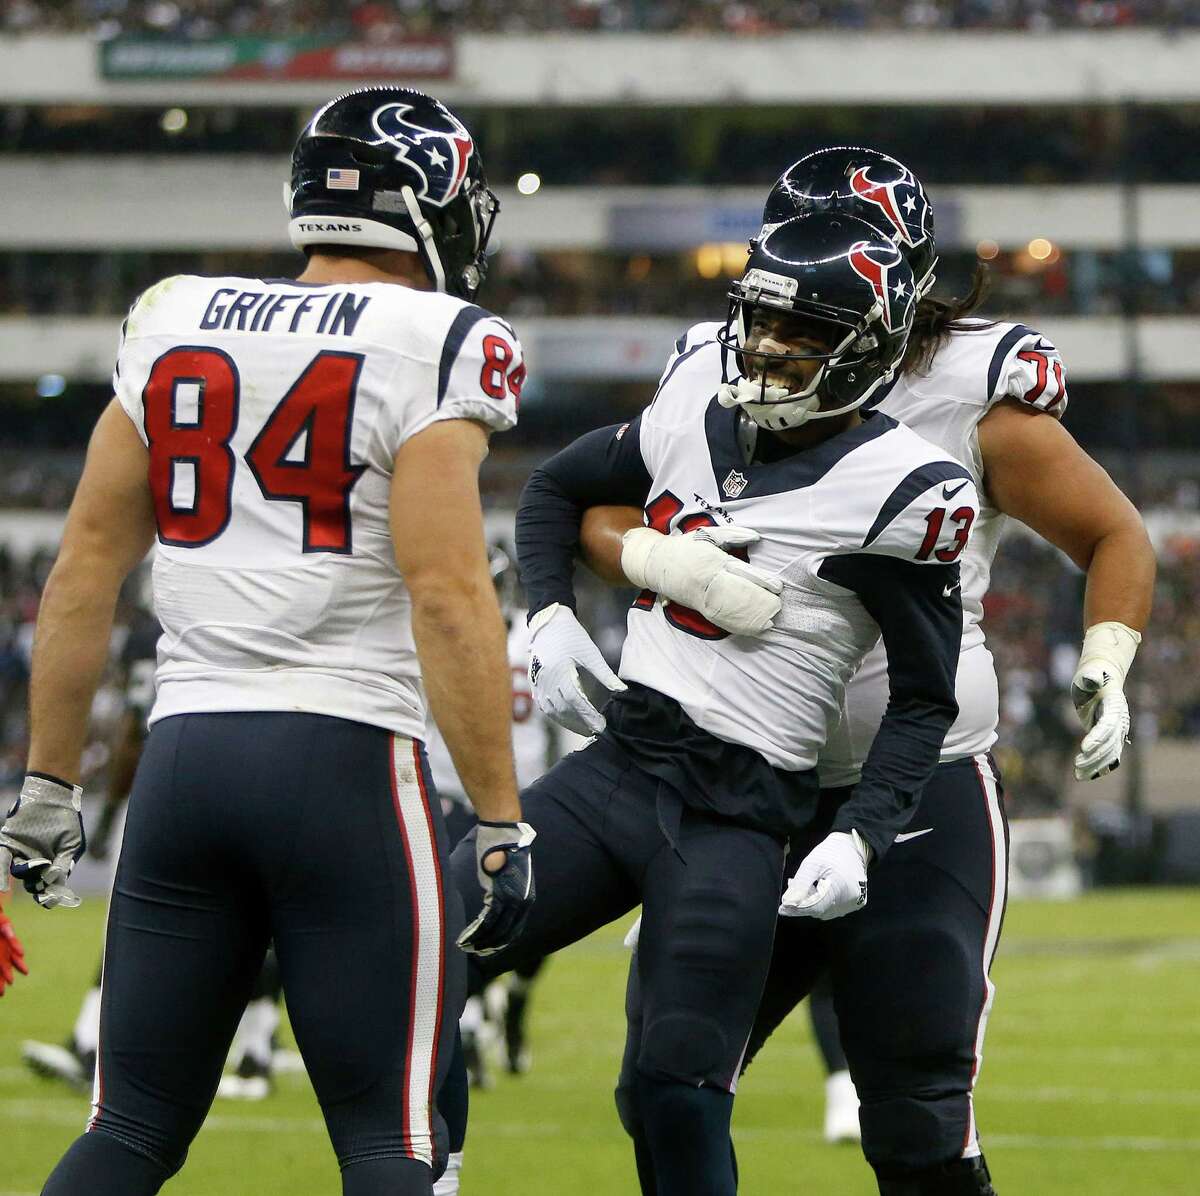 Texans wide receiver Braxton Miller (13) is all smiles as he celebrates scoring his first NFL touchdown with teammates in the second quarter Monday night.